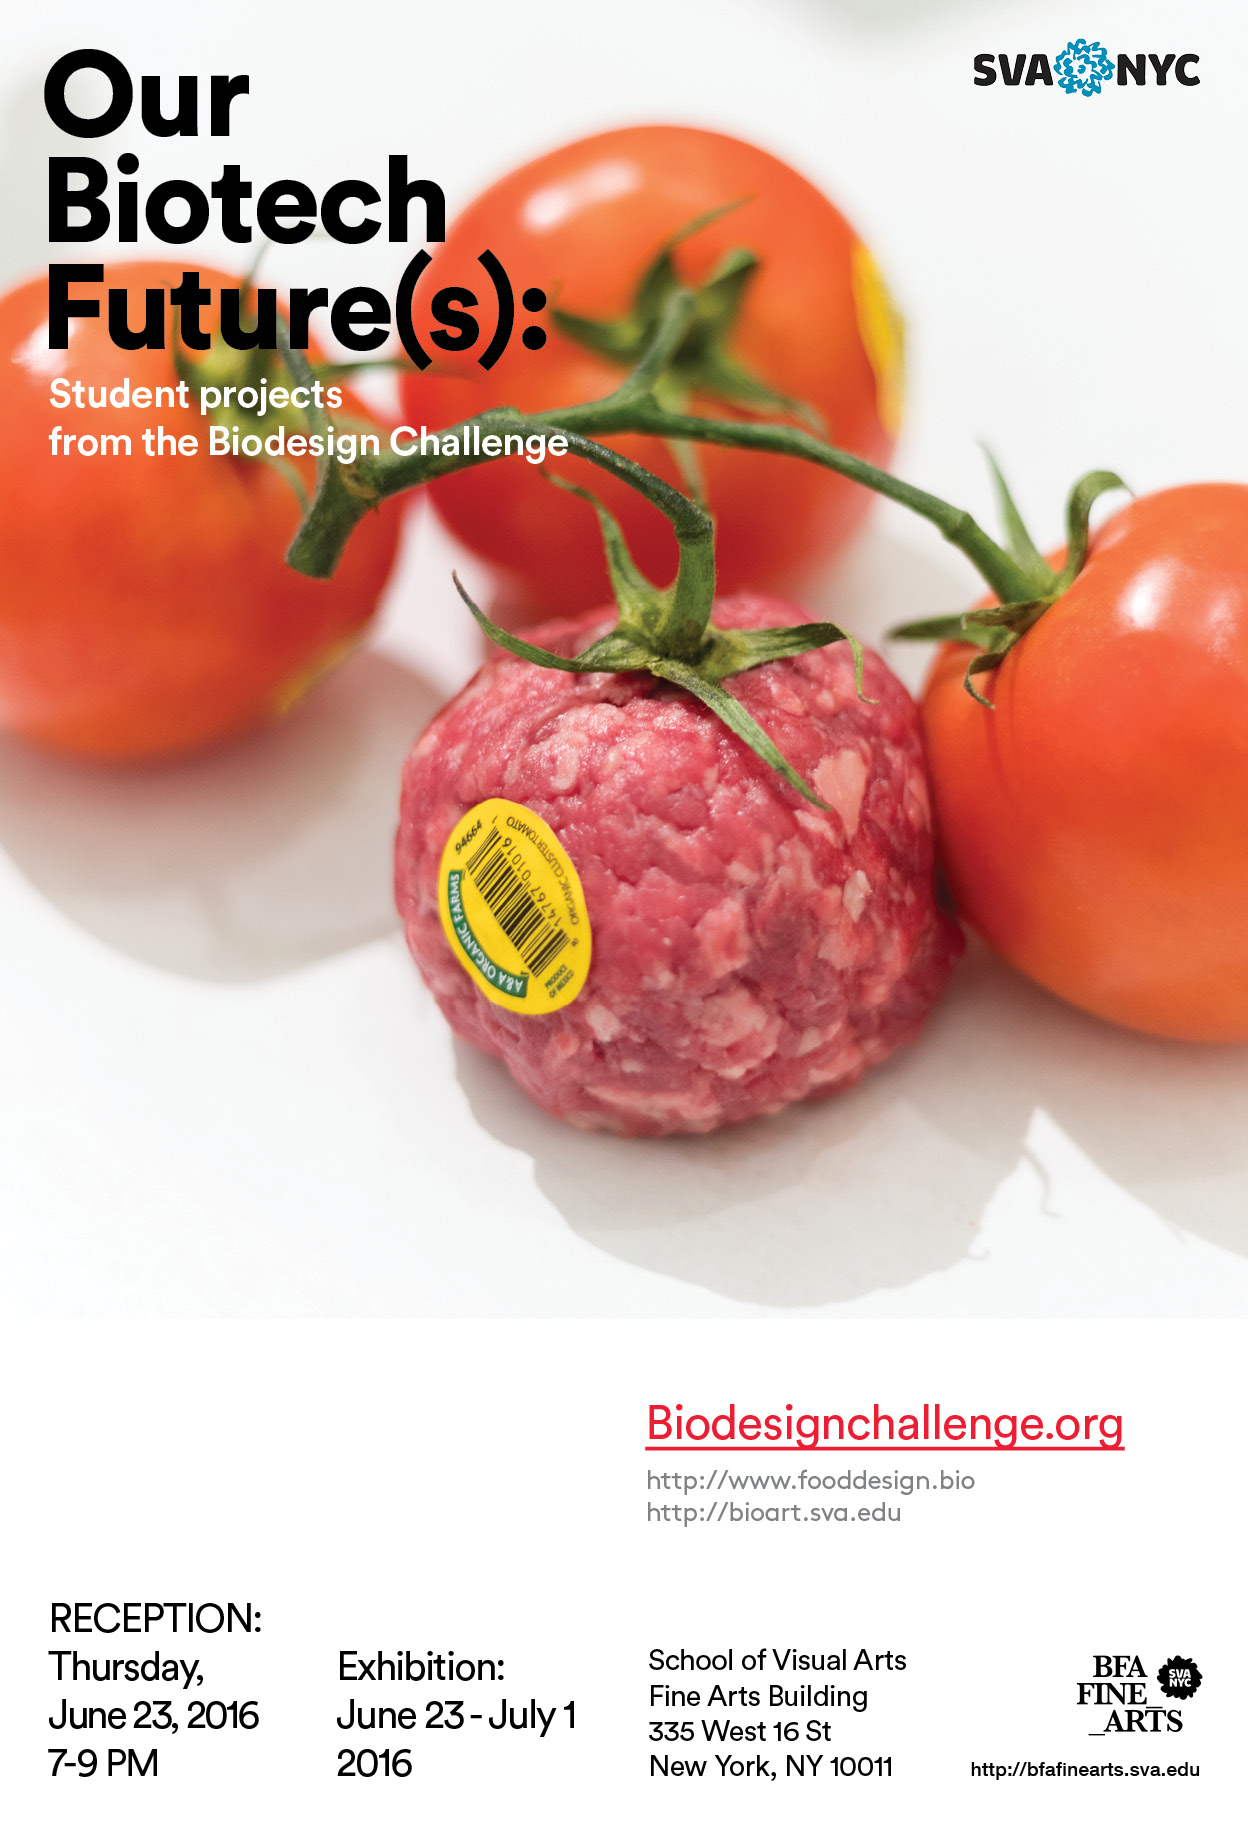 Poster for Biotech Future(s) with an illustration of tomatoes and one of them is made of meat with a yellow sticker on it